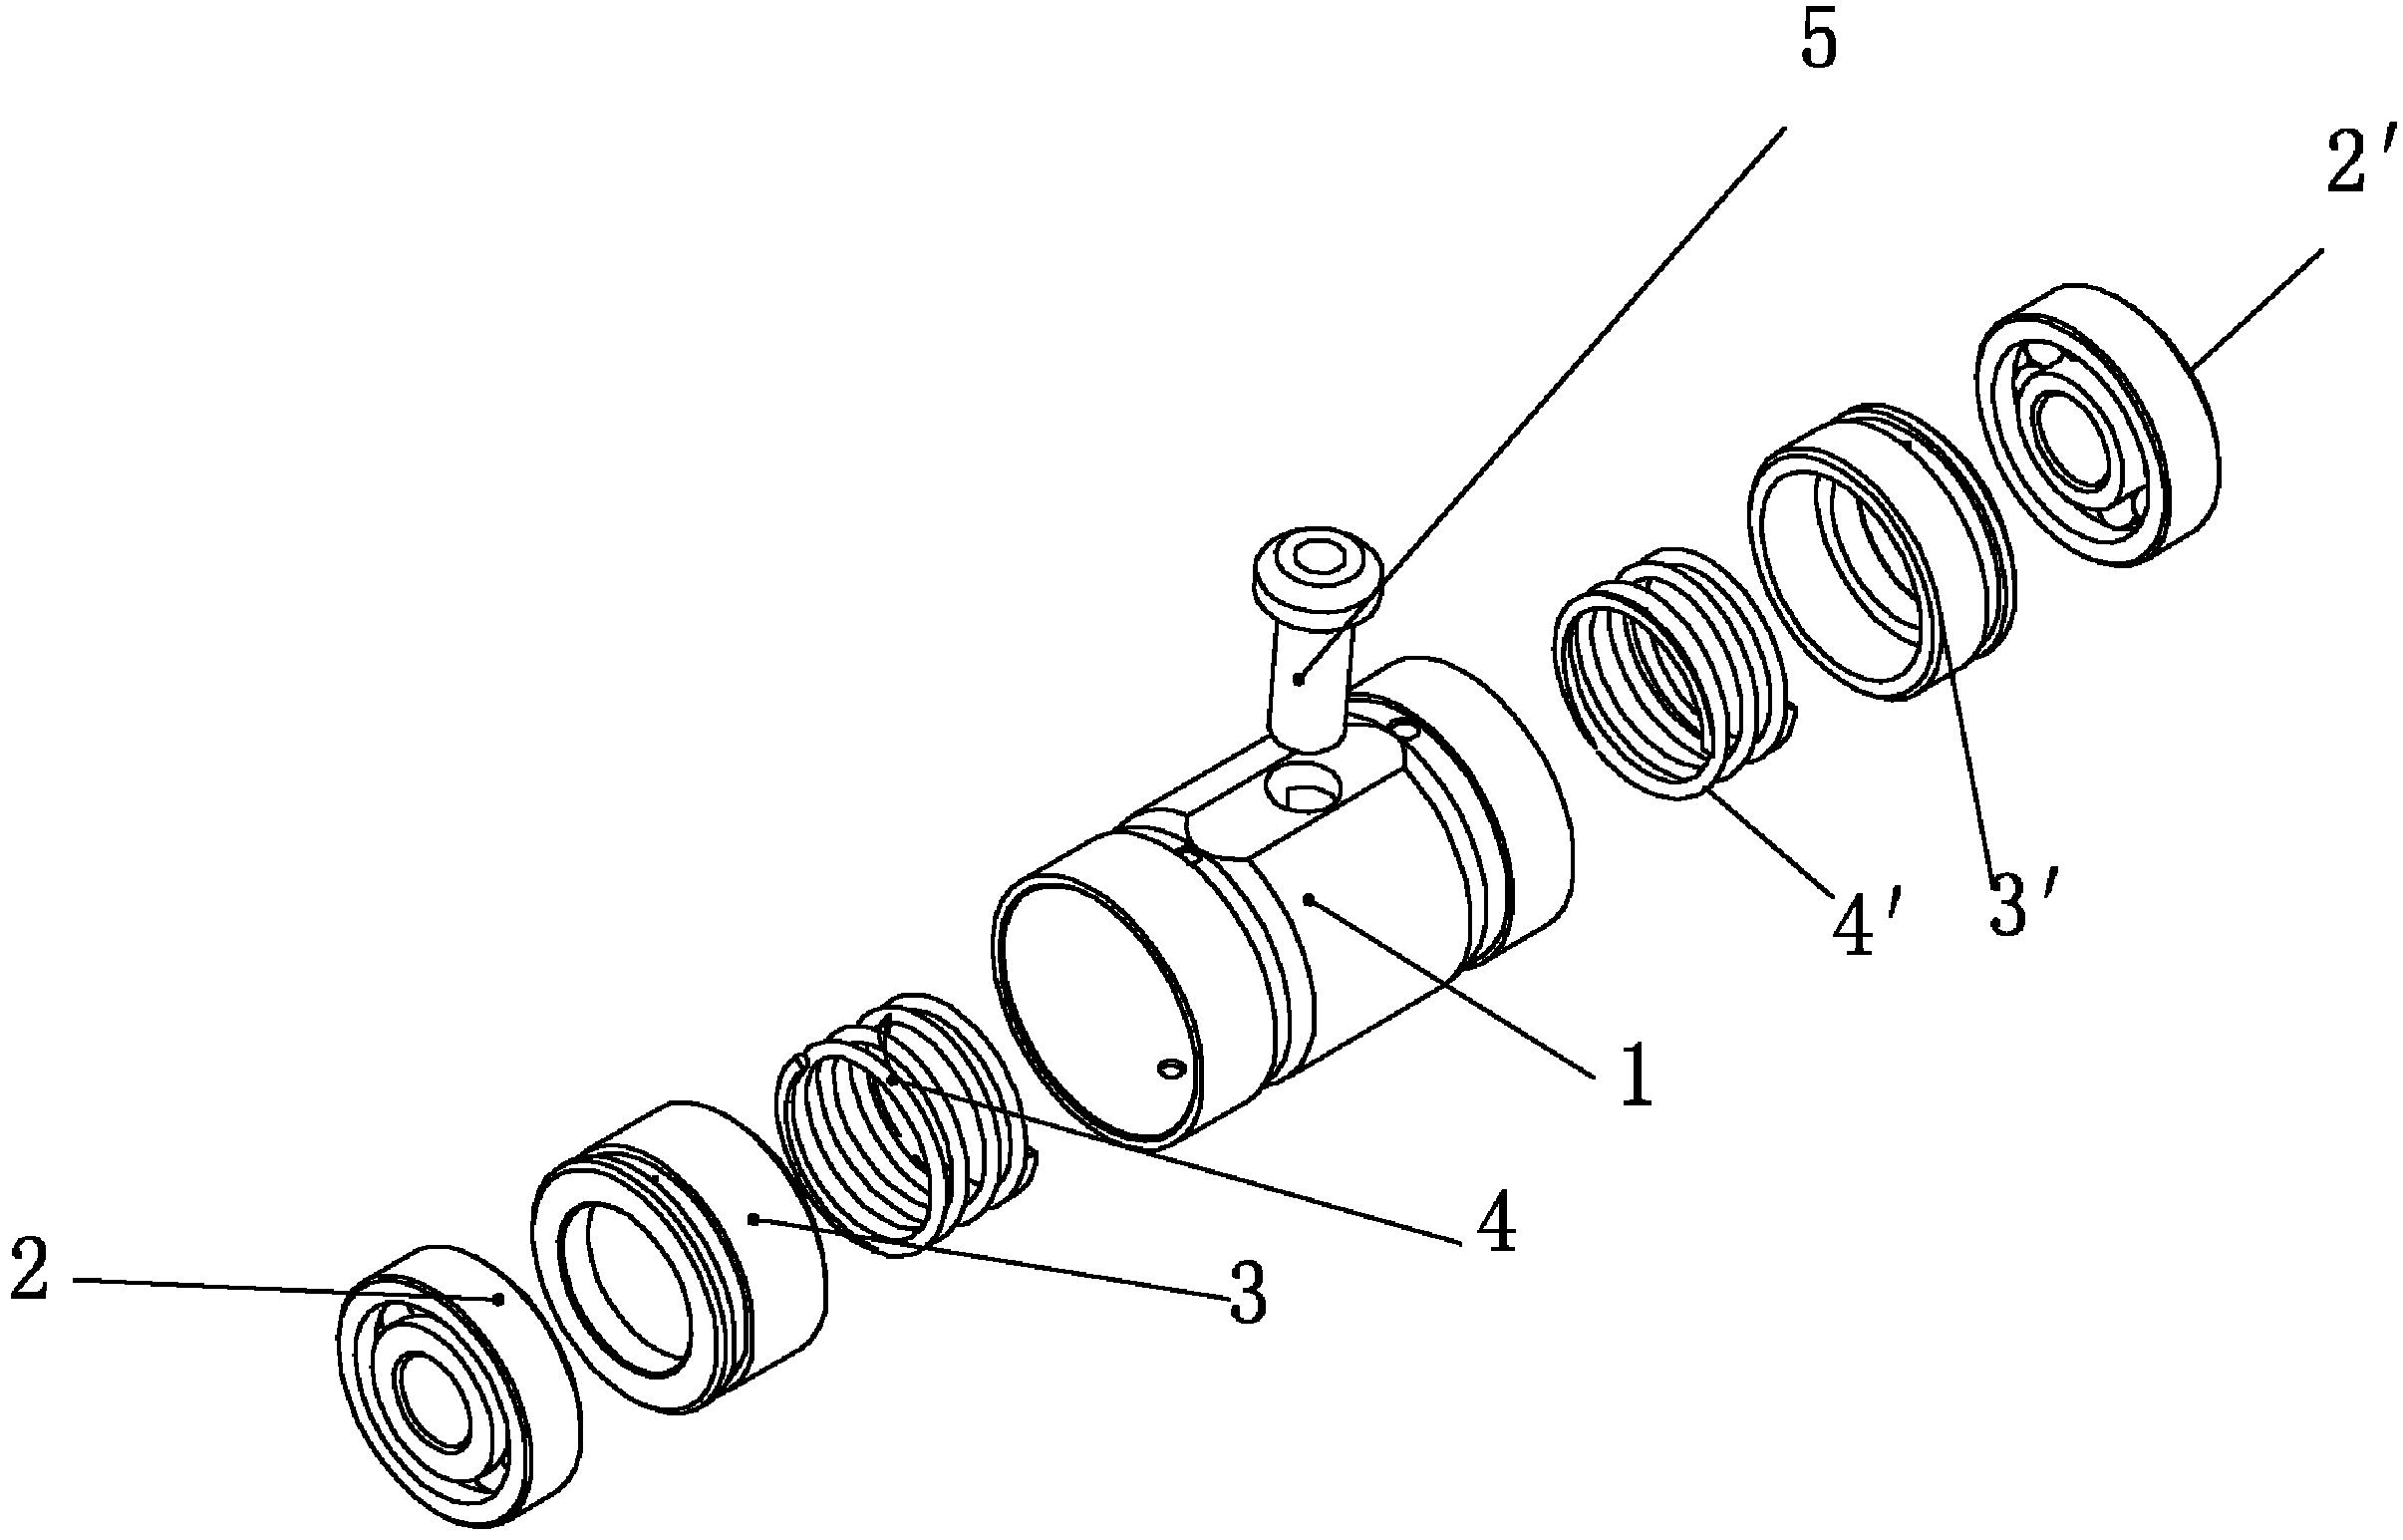 Rotor Support Mechanism of Rolling Bearing Turbocharger